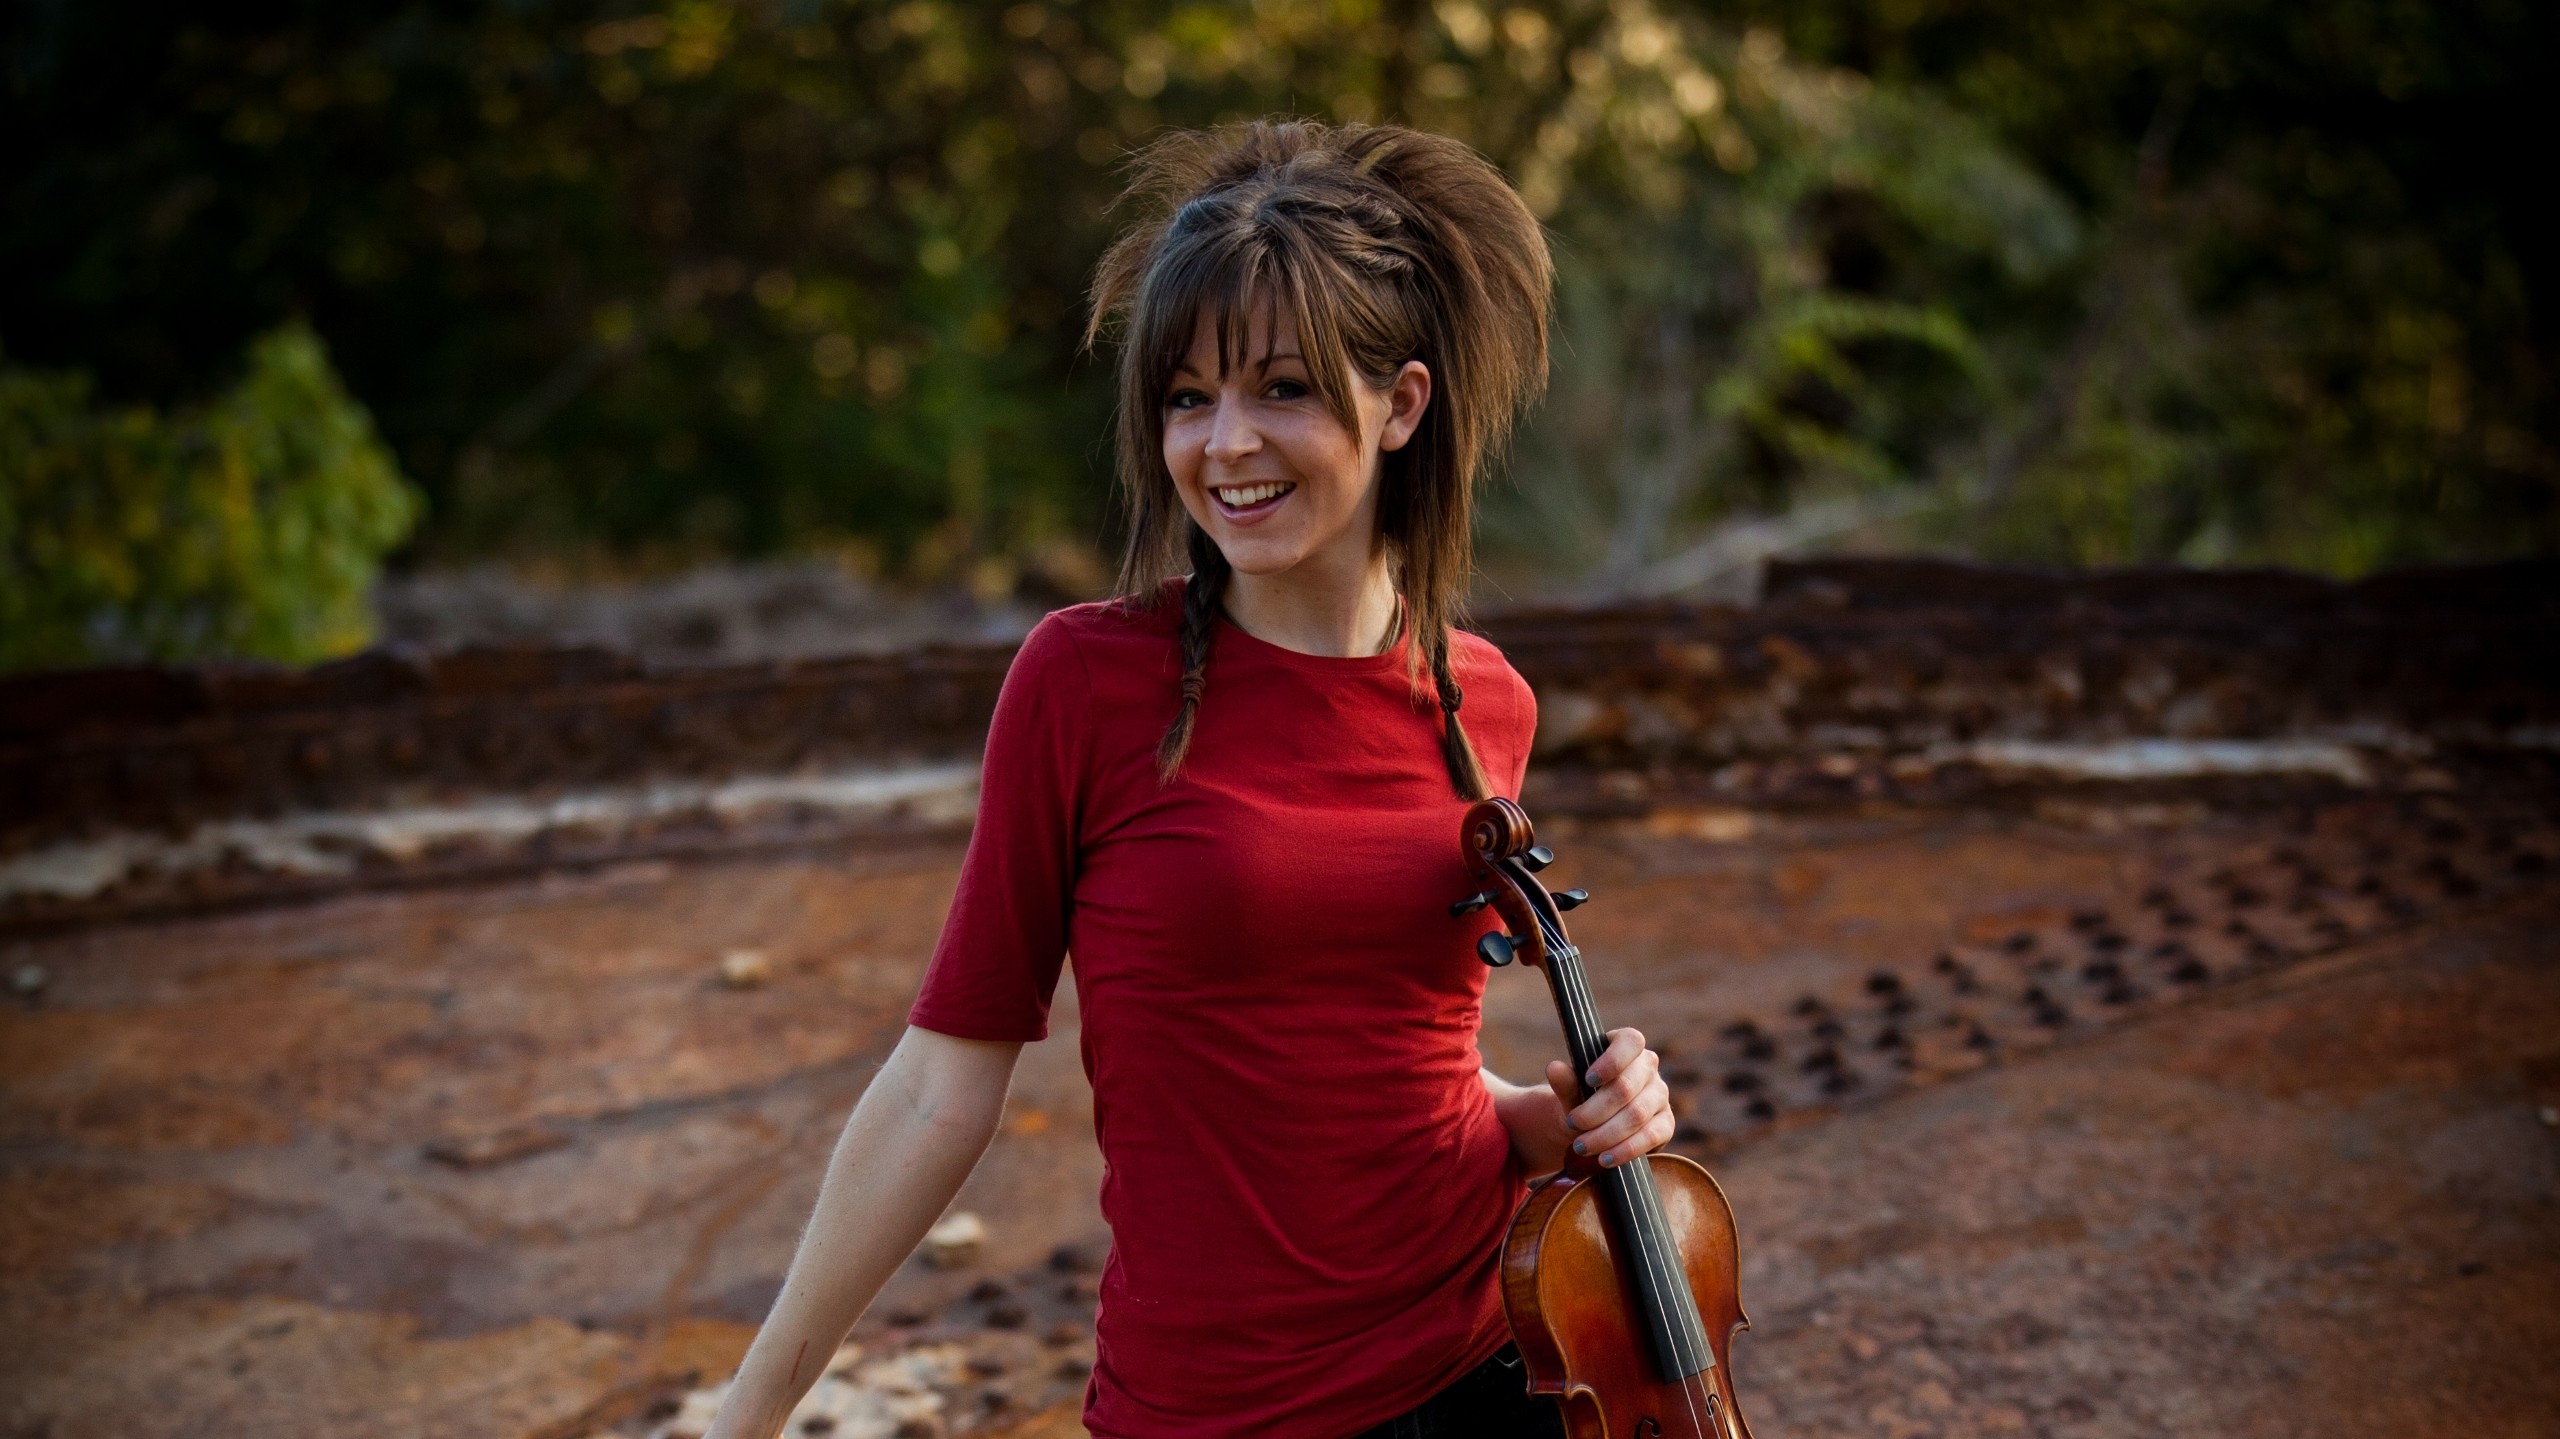 People 2560x1439 Lindsey Stirling violin women musician musical instrument smiling red clothing women outdoors